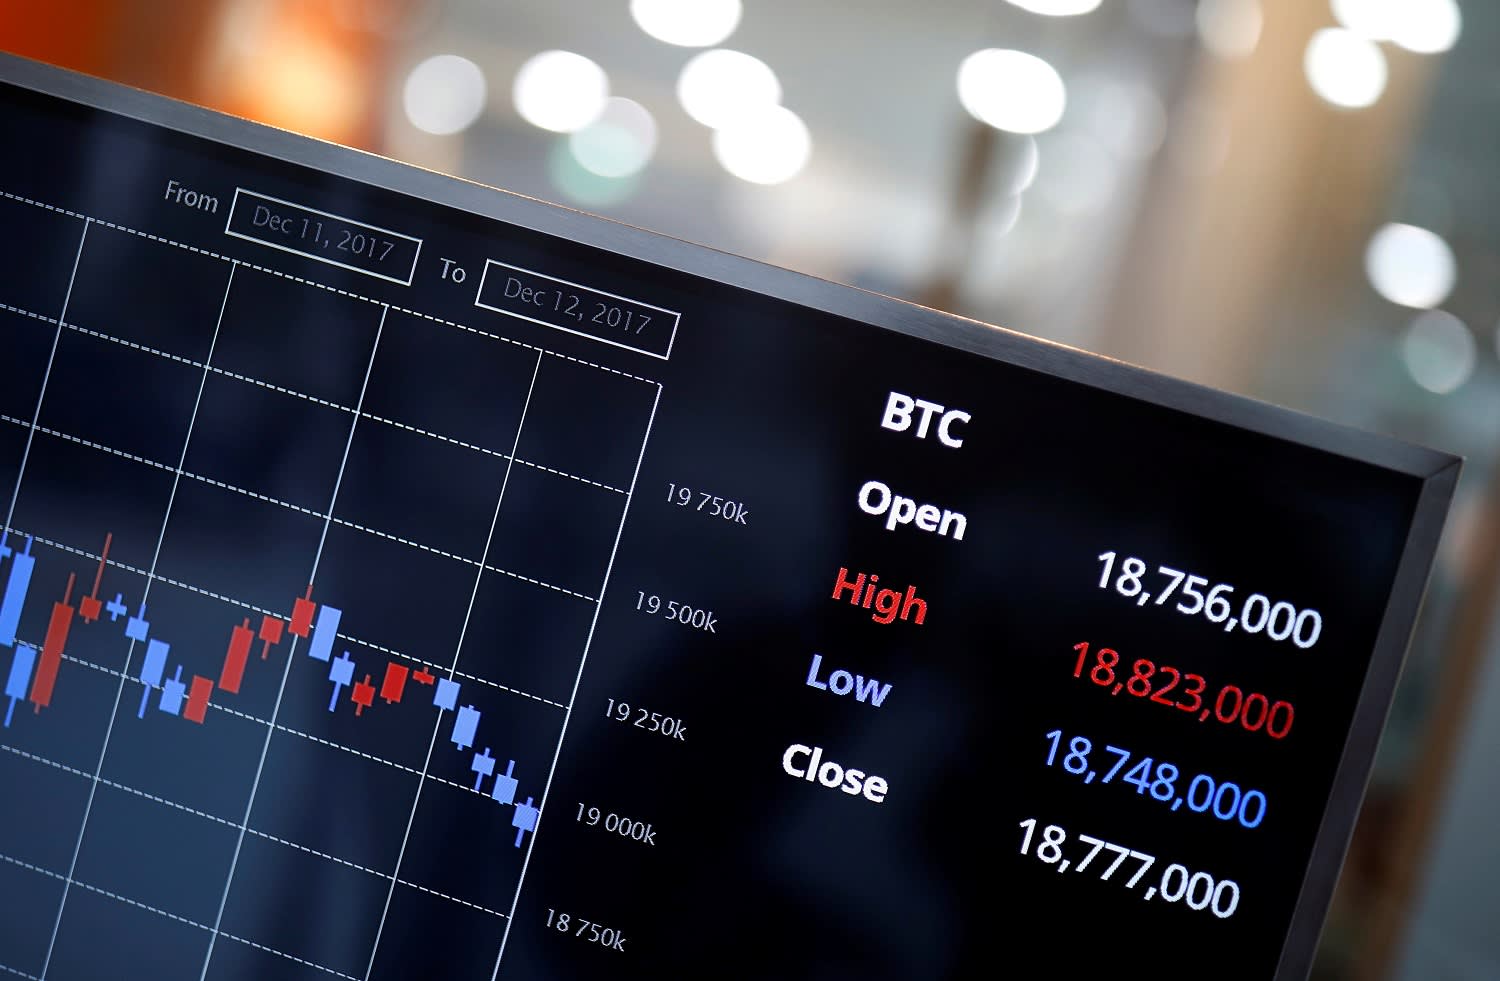 Online Service UTEX Launches New Crypto Exchange With Trading Competition 